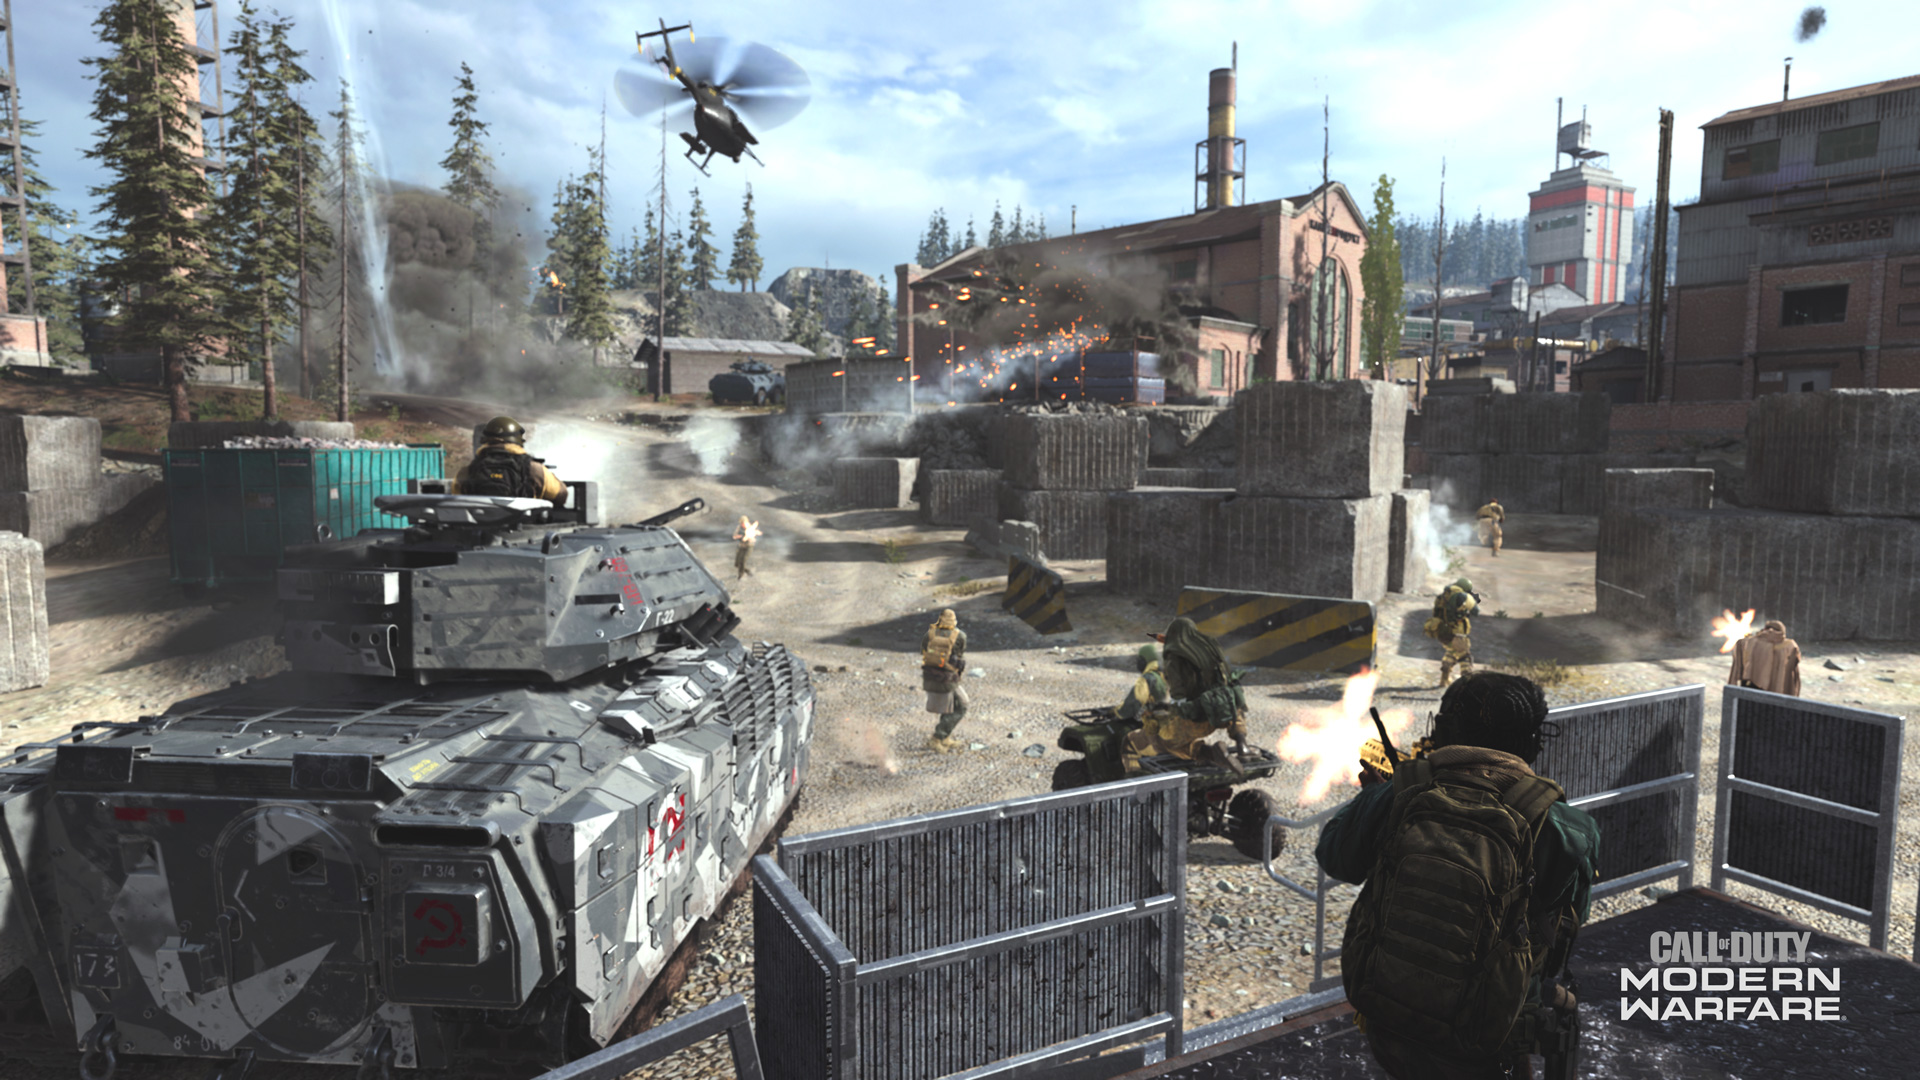 The Modern Warfare 2 beta was the biggest in Call of Duty history